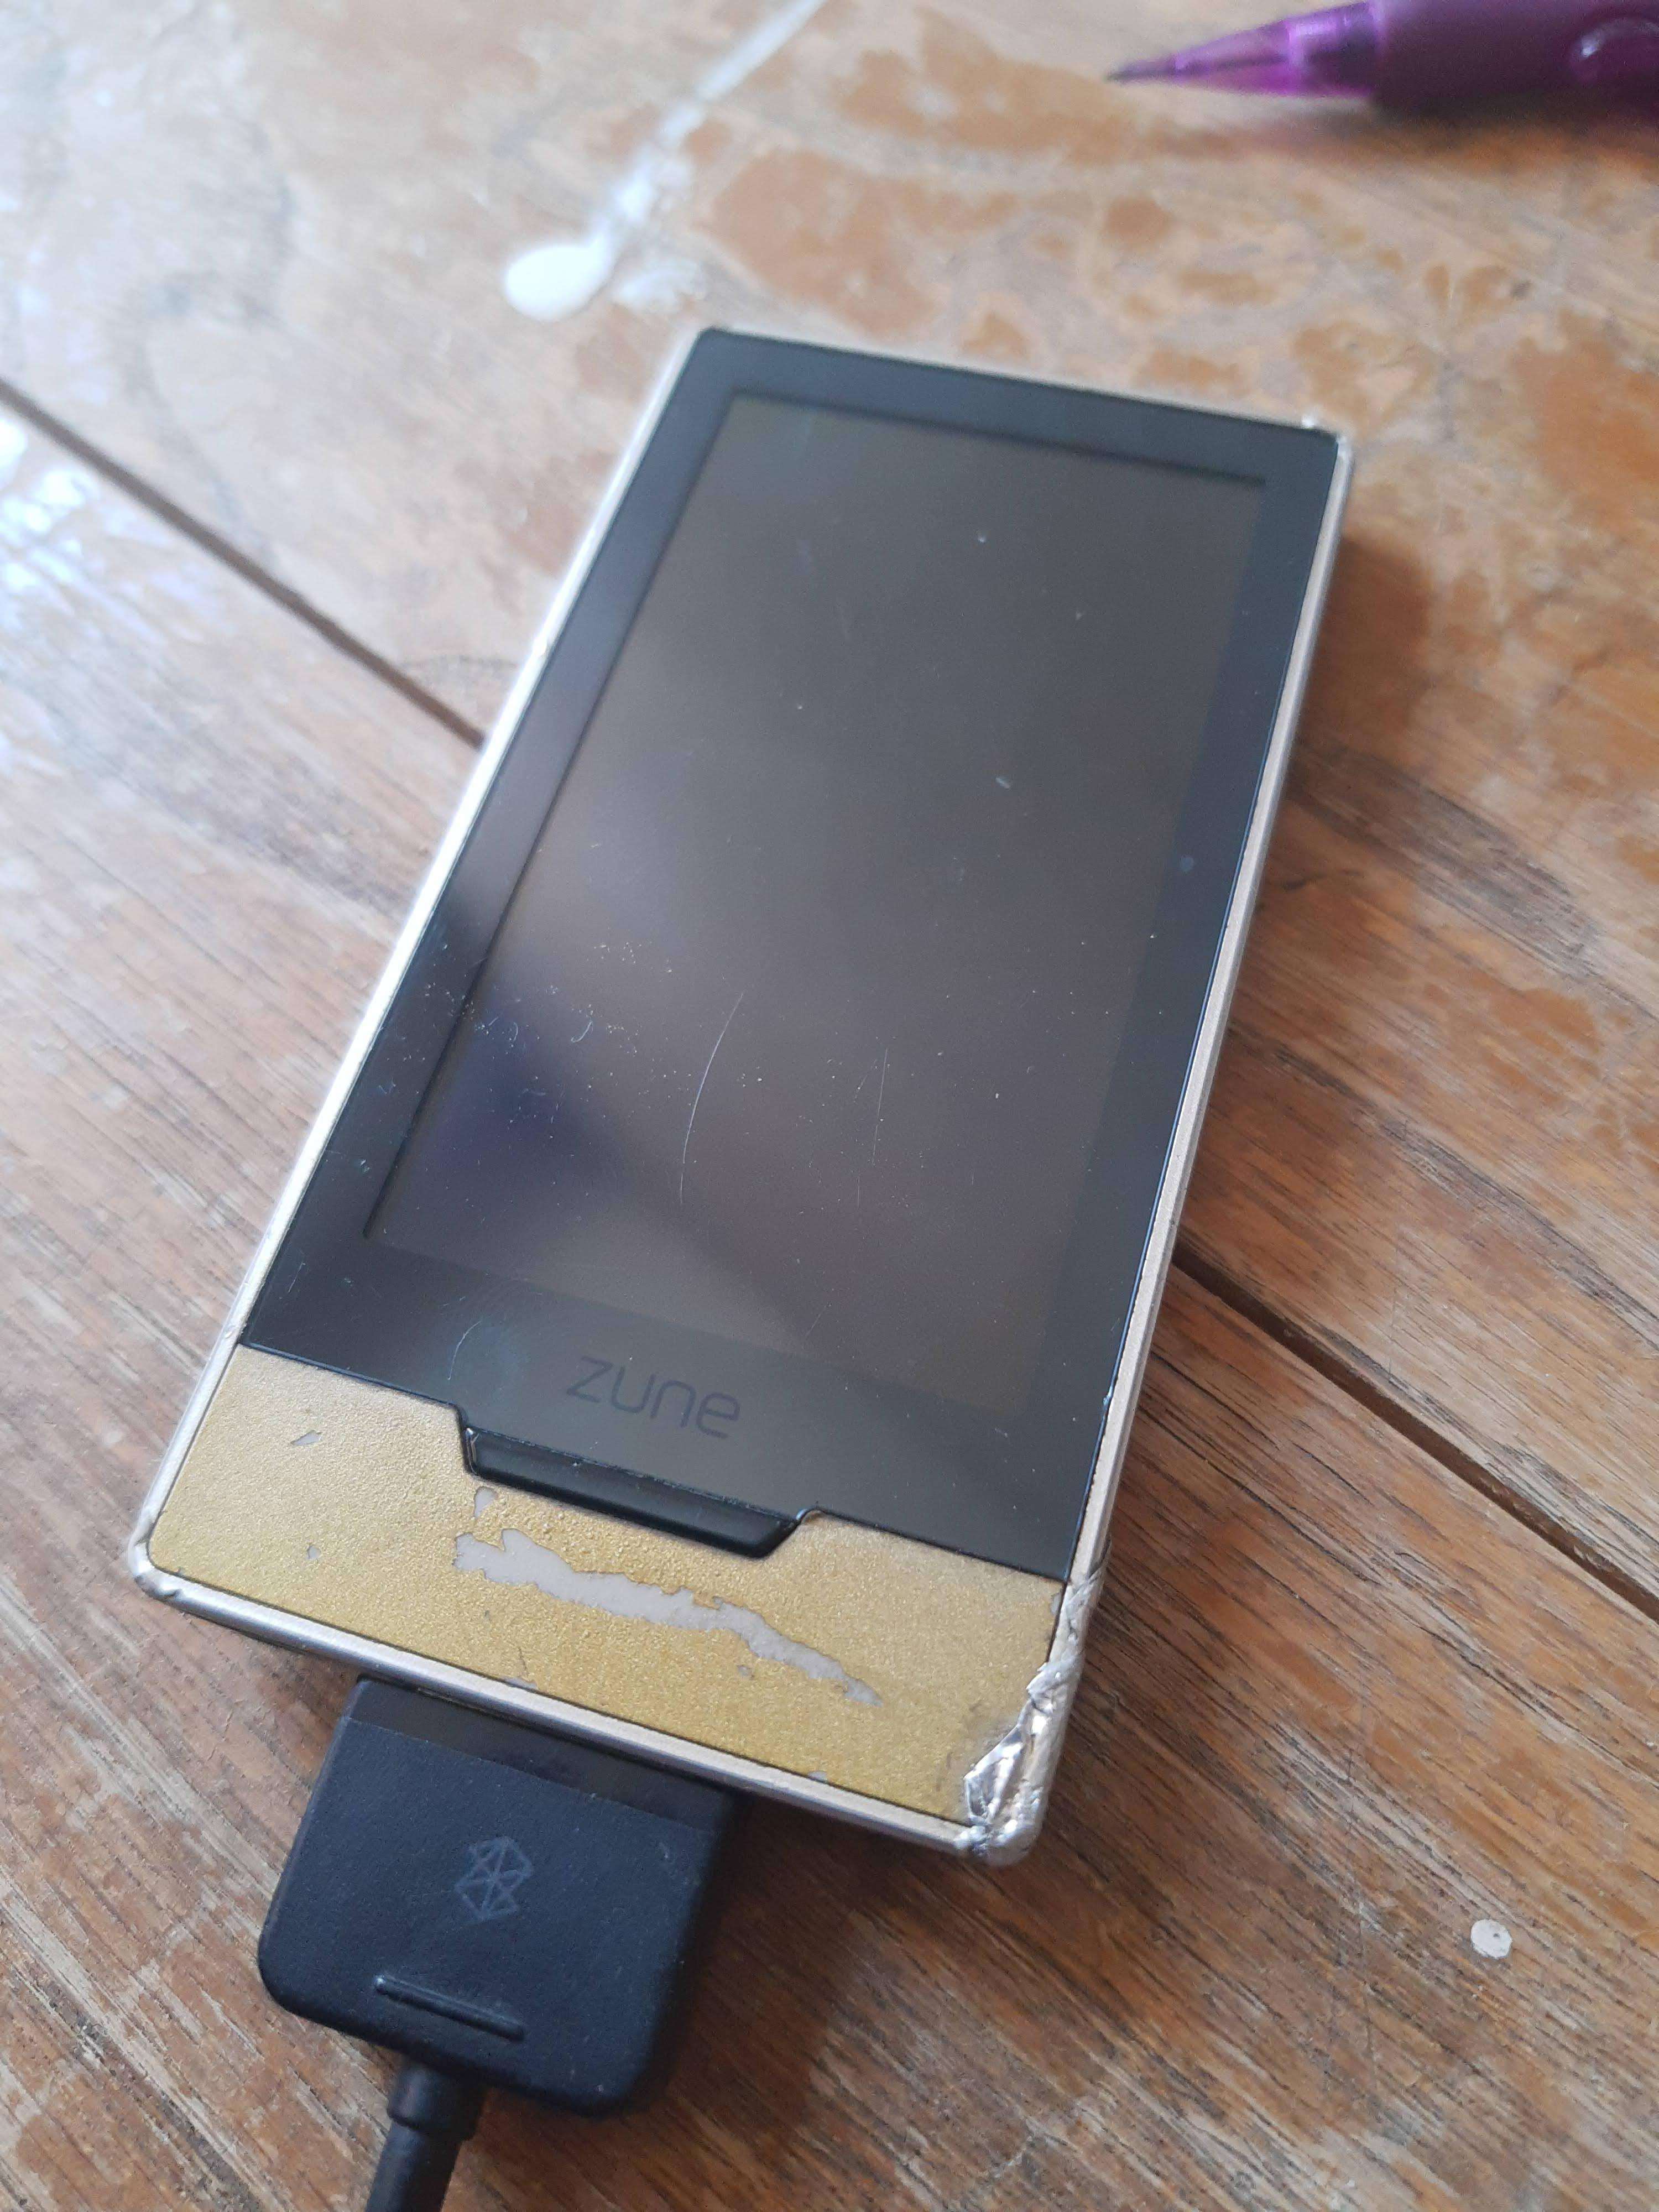 image showing [OC] After 12 years of daily use, my Zune expired today.